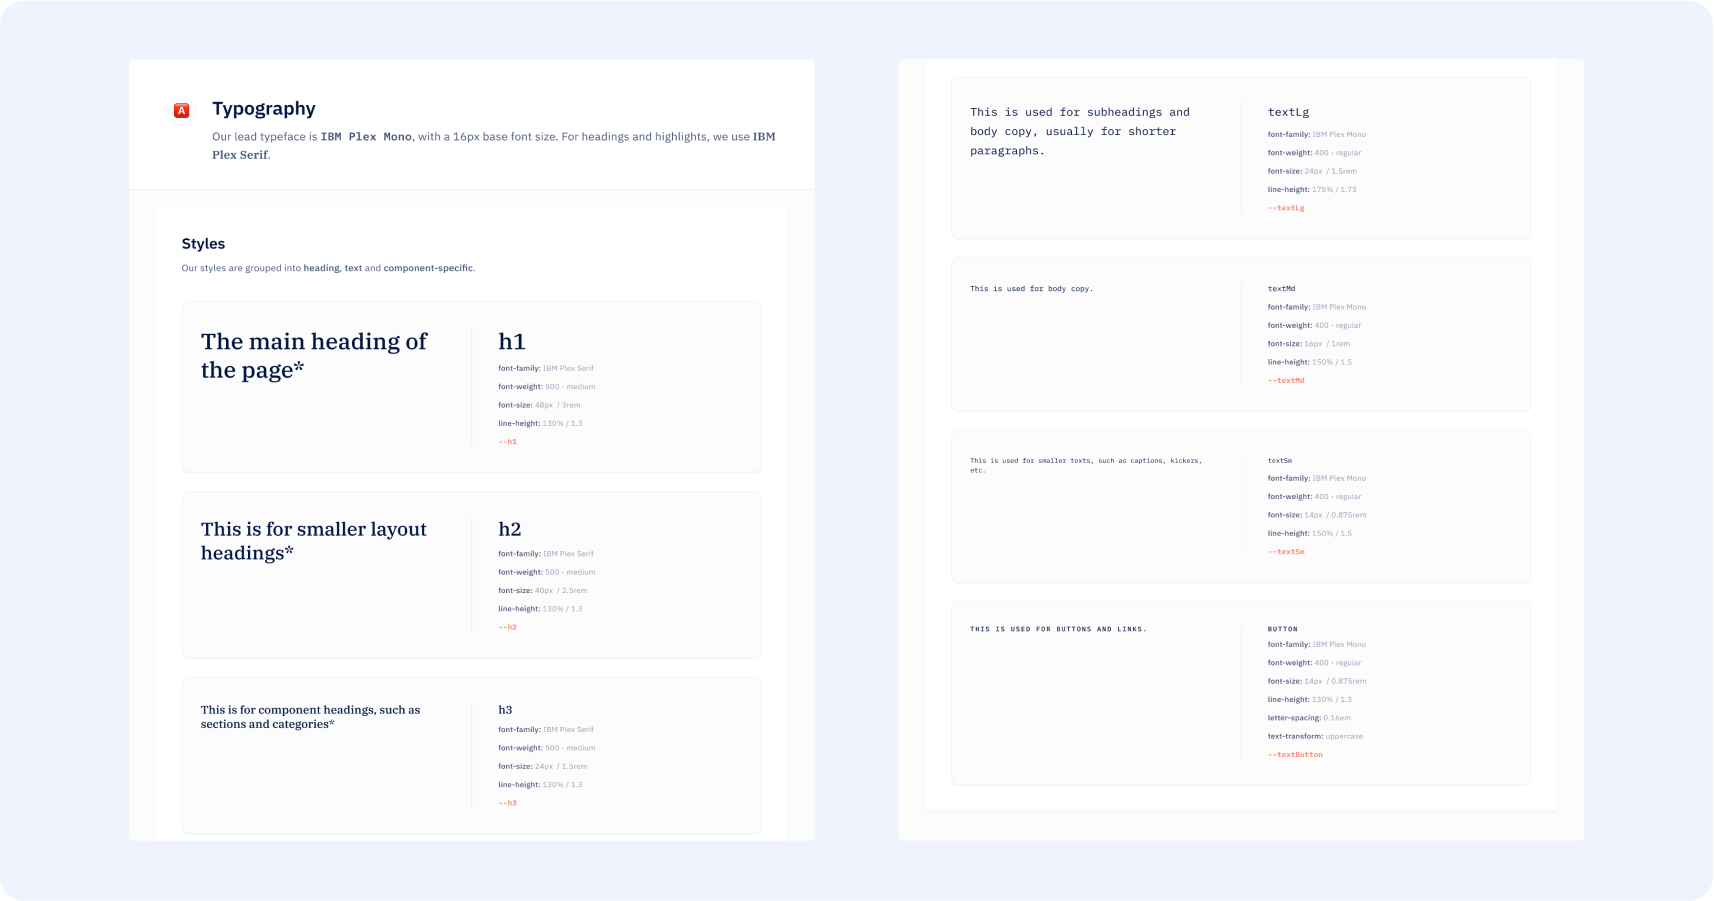 Snapshot of the typography guidelines, showcasing the various typefaces, font sizes, line heights, and styles used in the Design System.